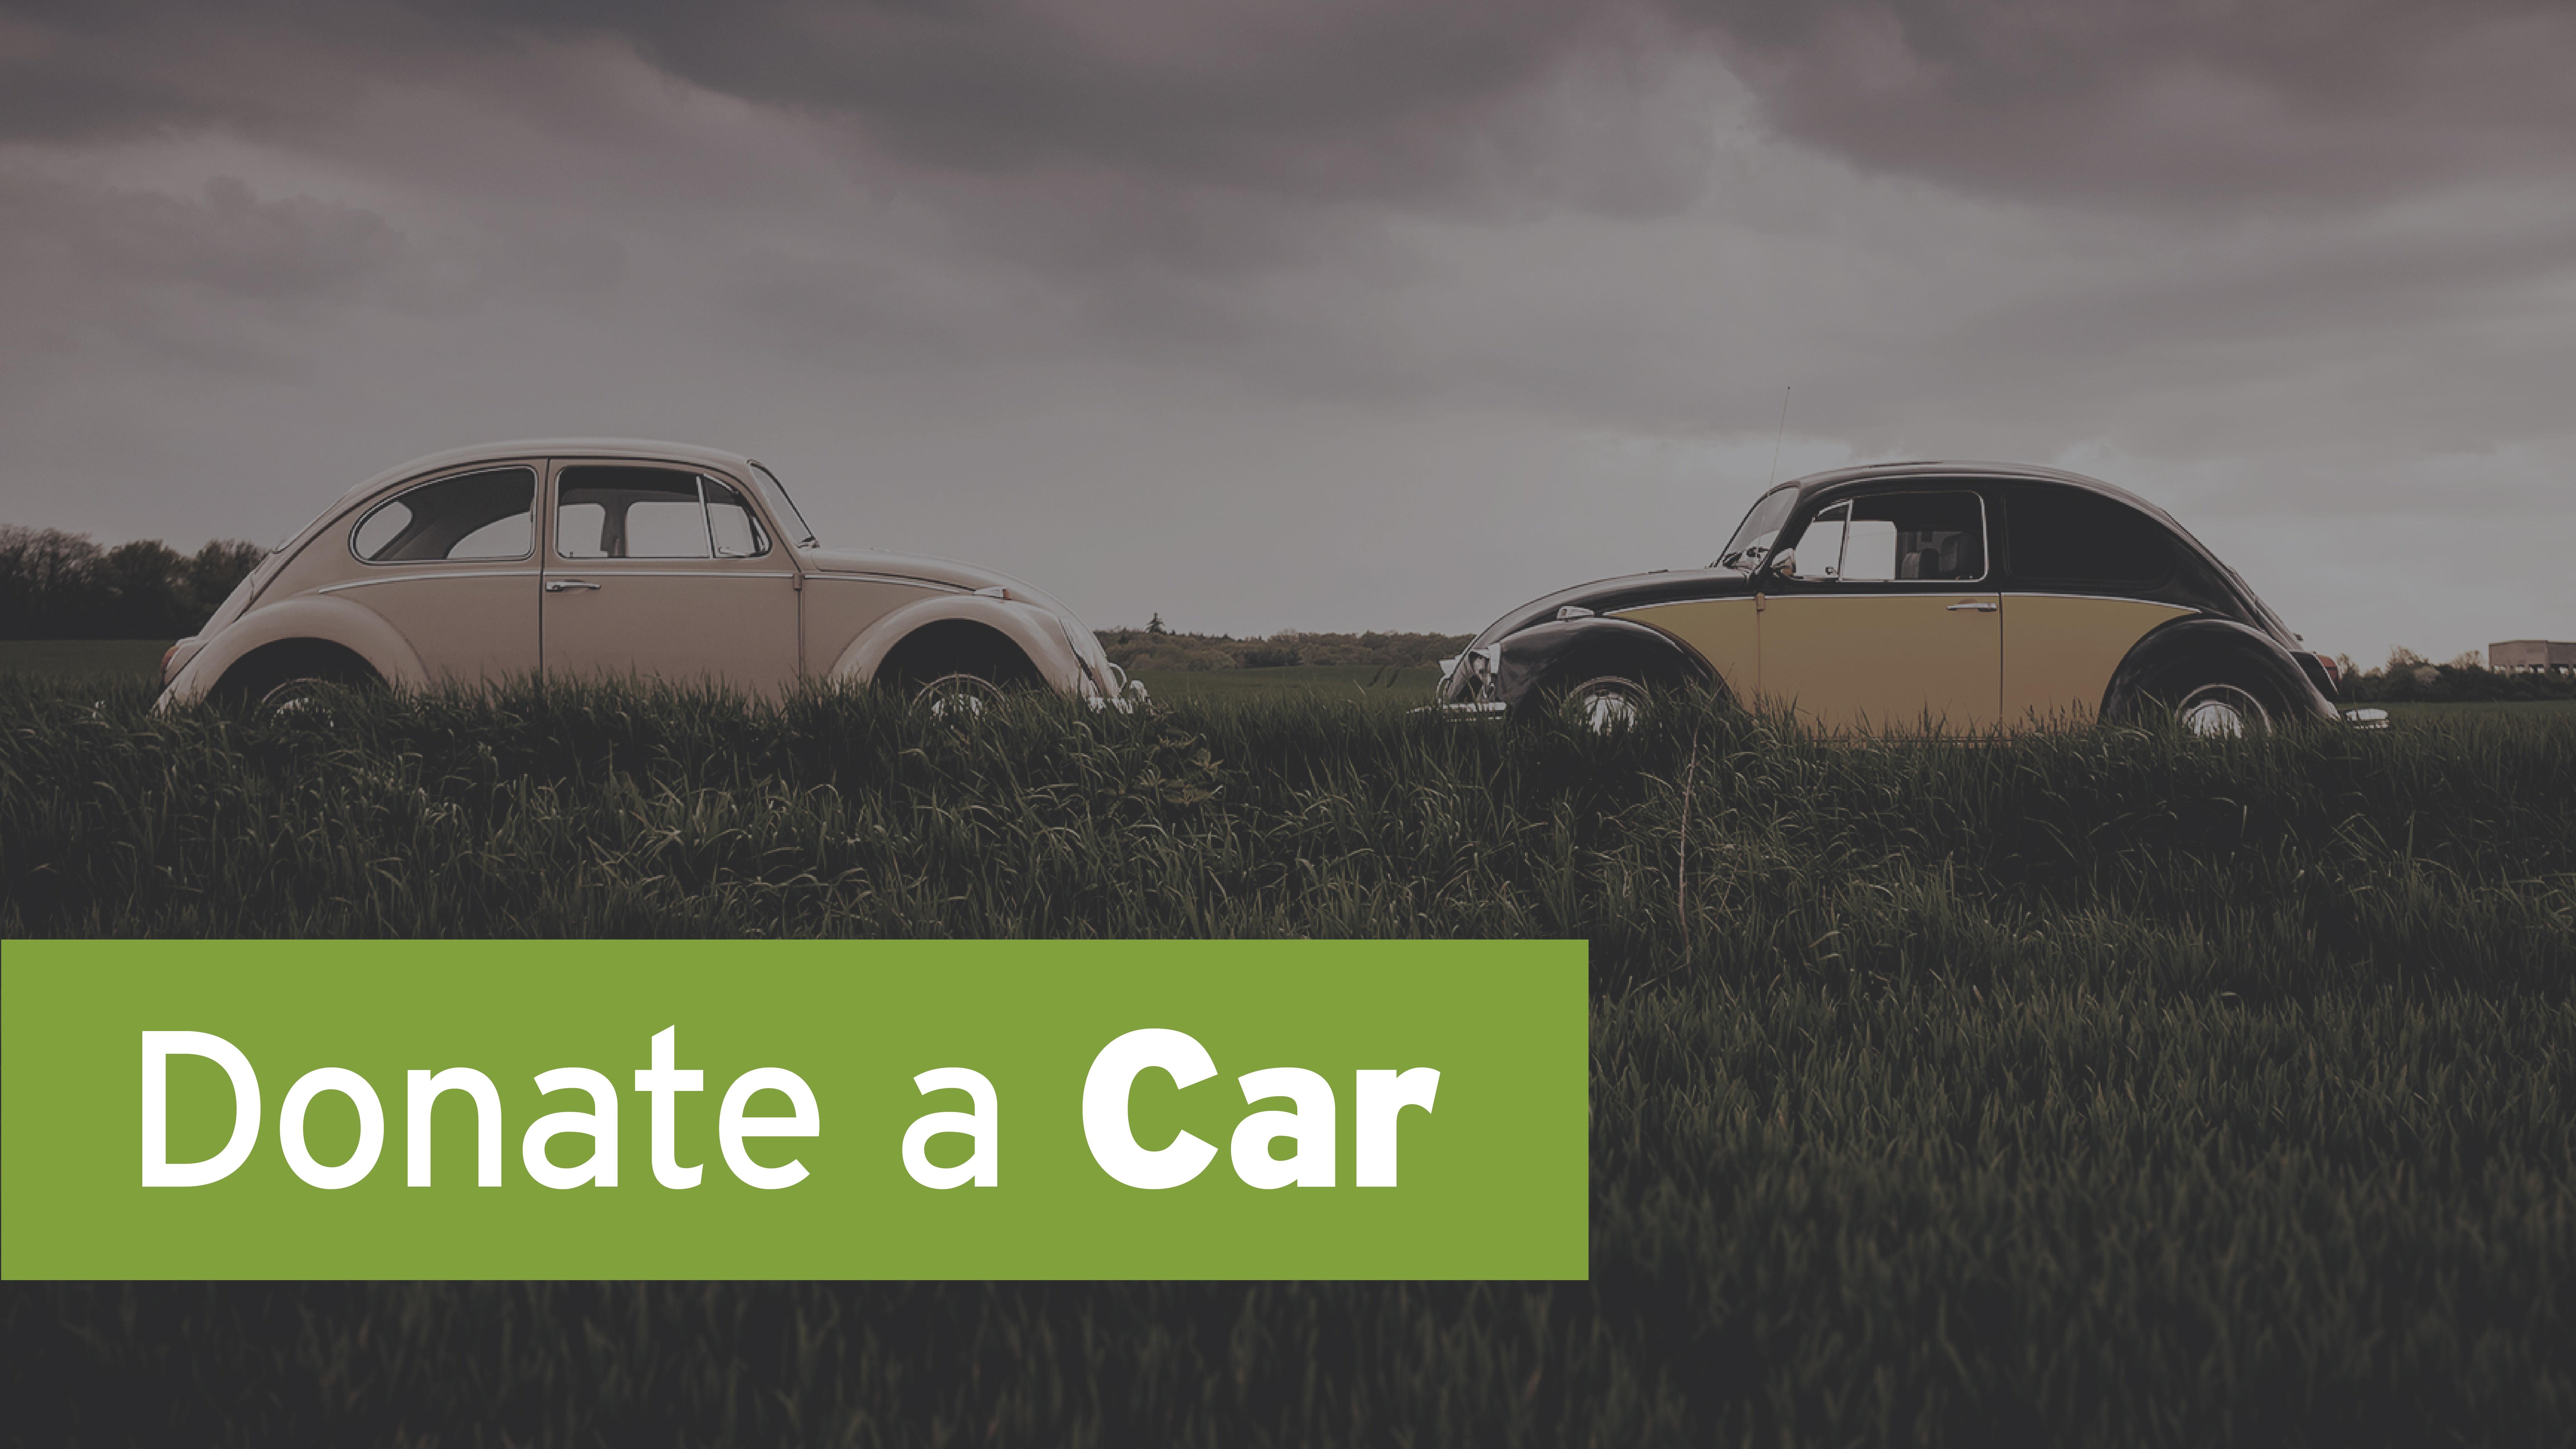 Donate a Car to UNC-TV